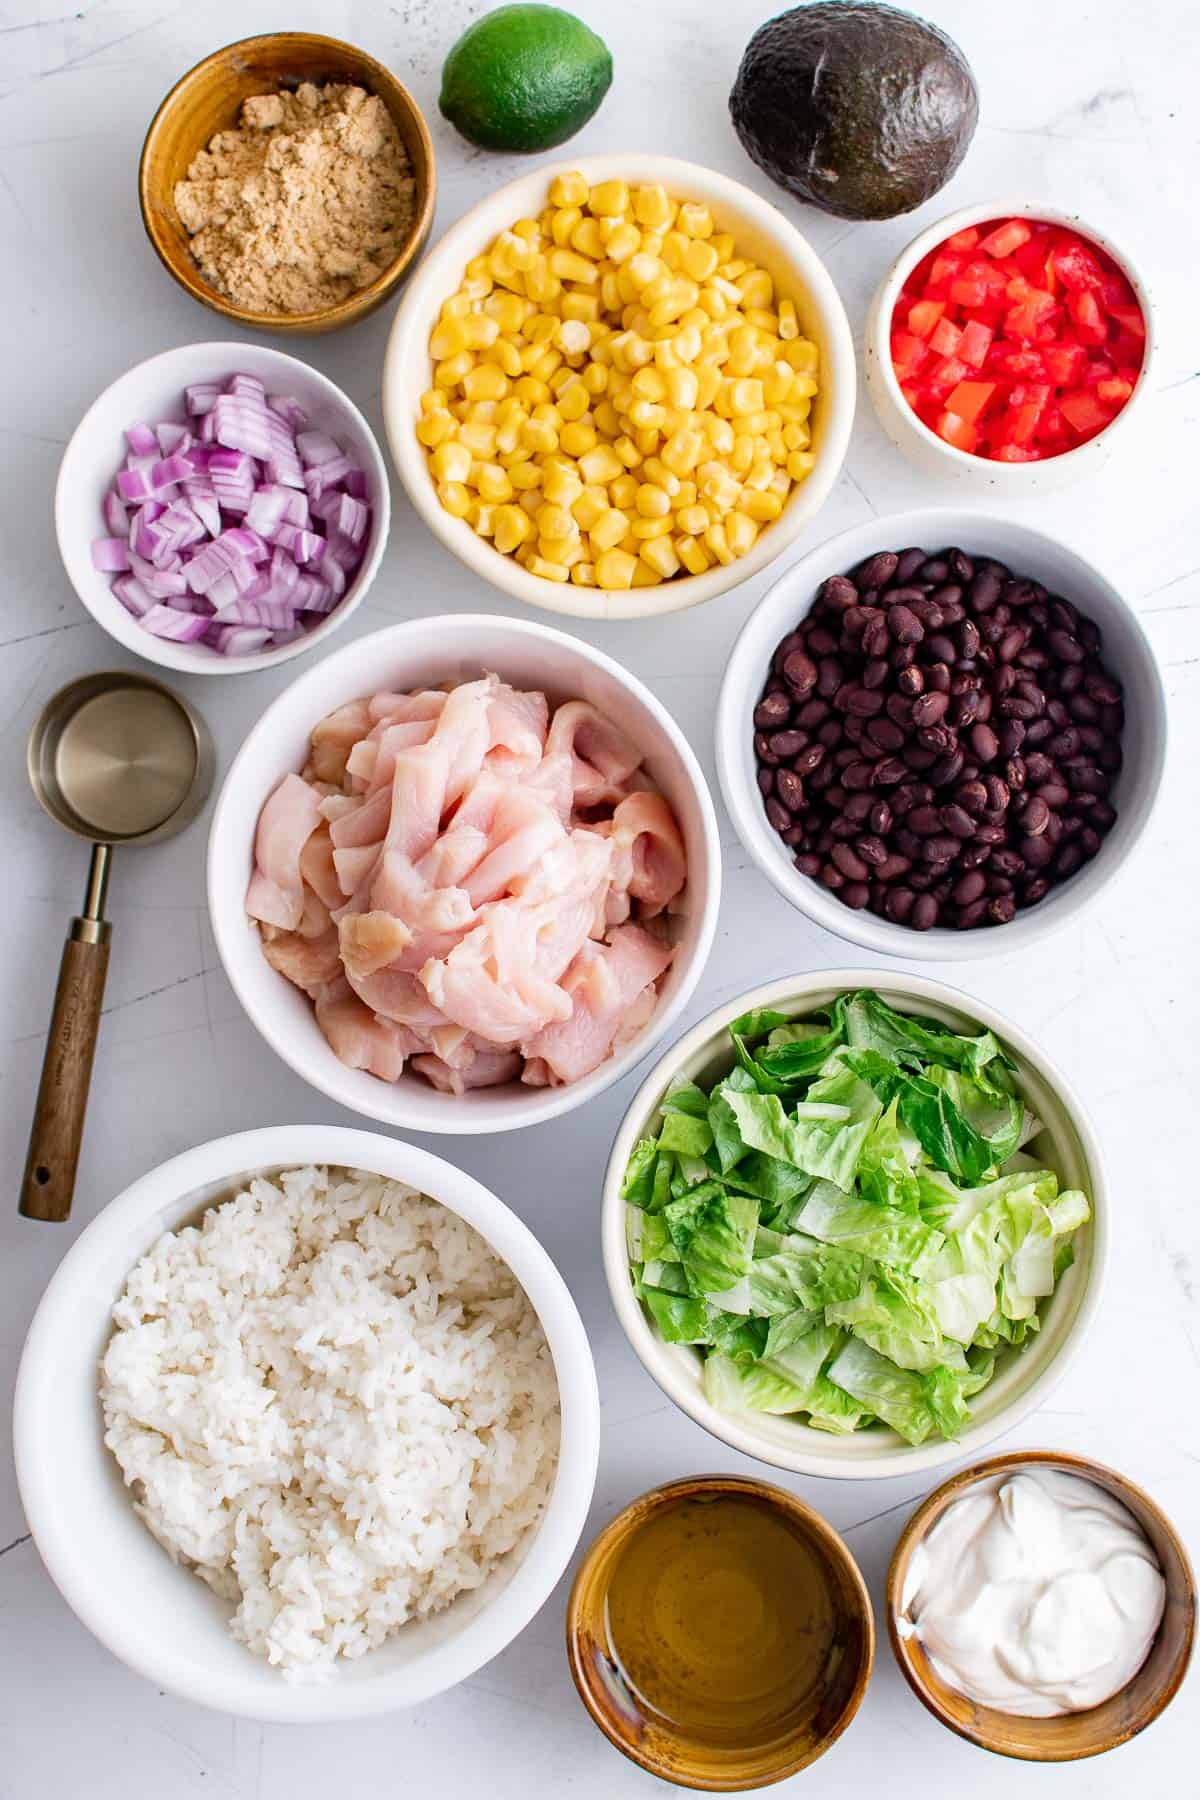 Ingredients to make burrito bowls -  chicken, onion, corn, beans, rice, avocado, lettuce and sour cream